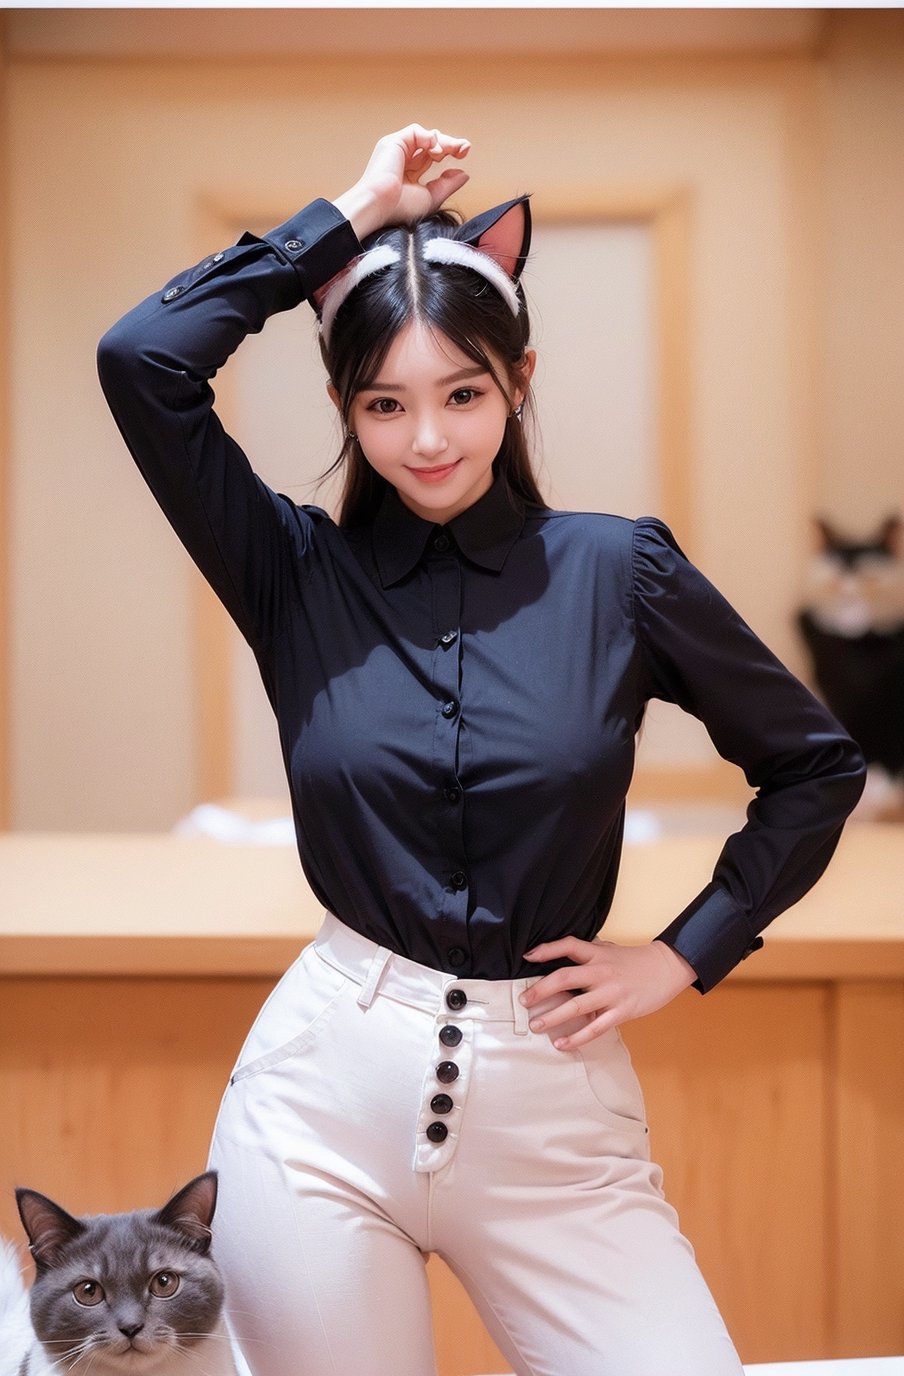 (((((Top_button_collared_long_sleeve_shirt:1.5))))),((((long_pants)))),((((standing)))),(((((front_viewed:1.5))))),(((((extra_long_hair_with_complete_fringes_with_blurry:1.5))))),(((cute_smiling_face:1.5))),((((looking_at_viewer:1.4)))),((((wear_cat's_ears:1.5)))),(beautiful and aesthetic:1.4),((((round cheeks, high-bridged nose, plastic surgery round eyes:1.5)))), (((Kpop style pose:1.4))),(((bank office))),
perfect.,Bomi,Enhance,Model ,Asian ,eungirl,((((1girl)))).,((Perfect lips)).,perfect light